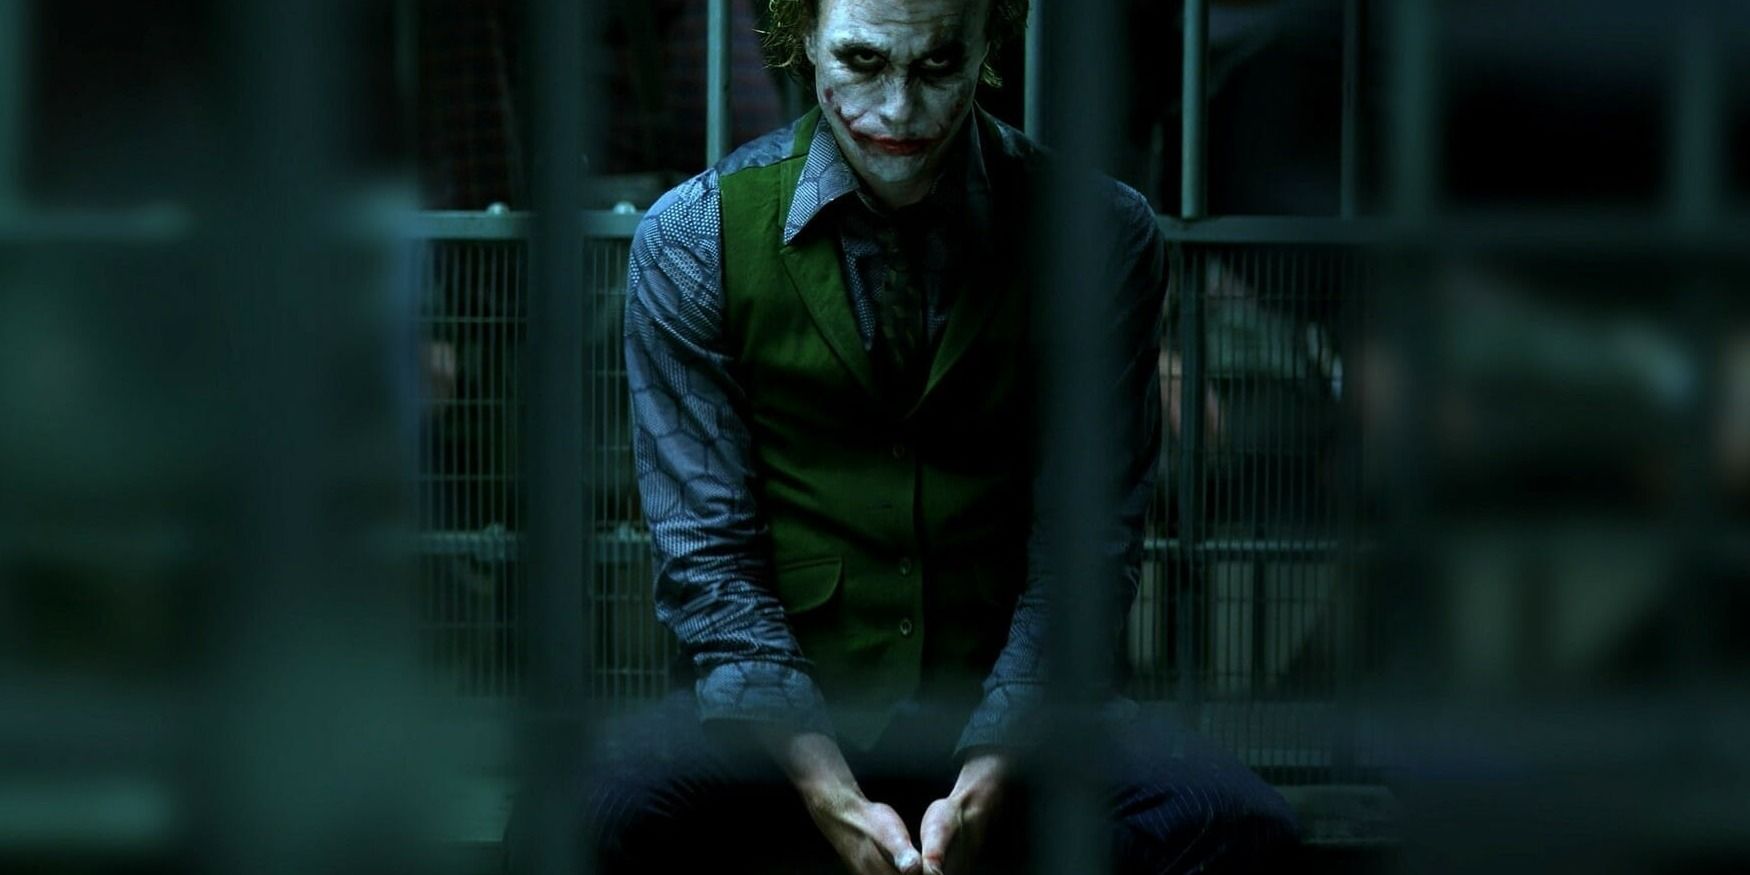 The Joker sits in a cell - The Dark Knight